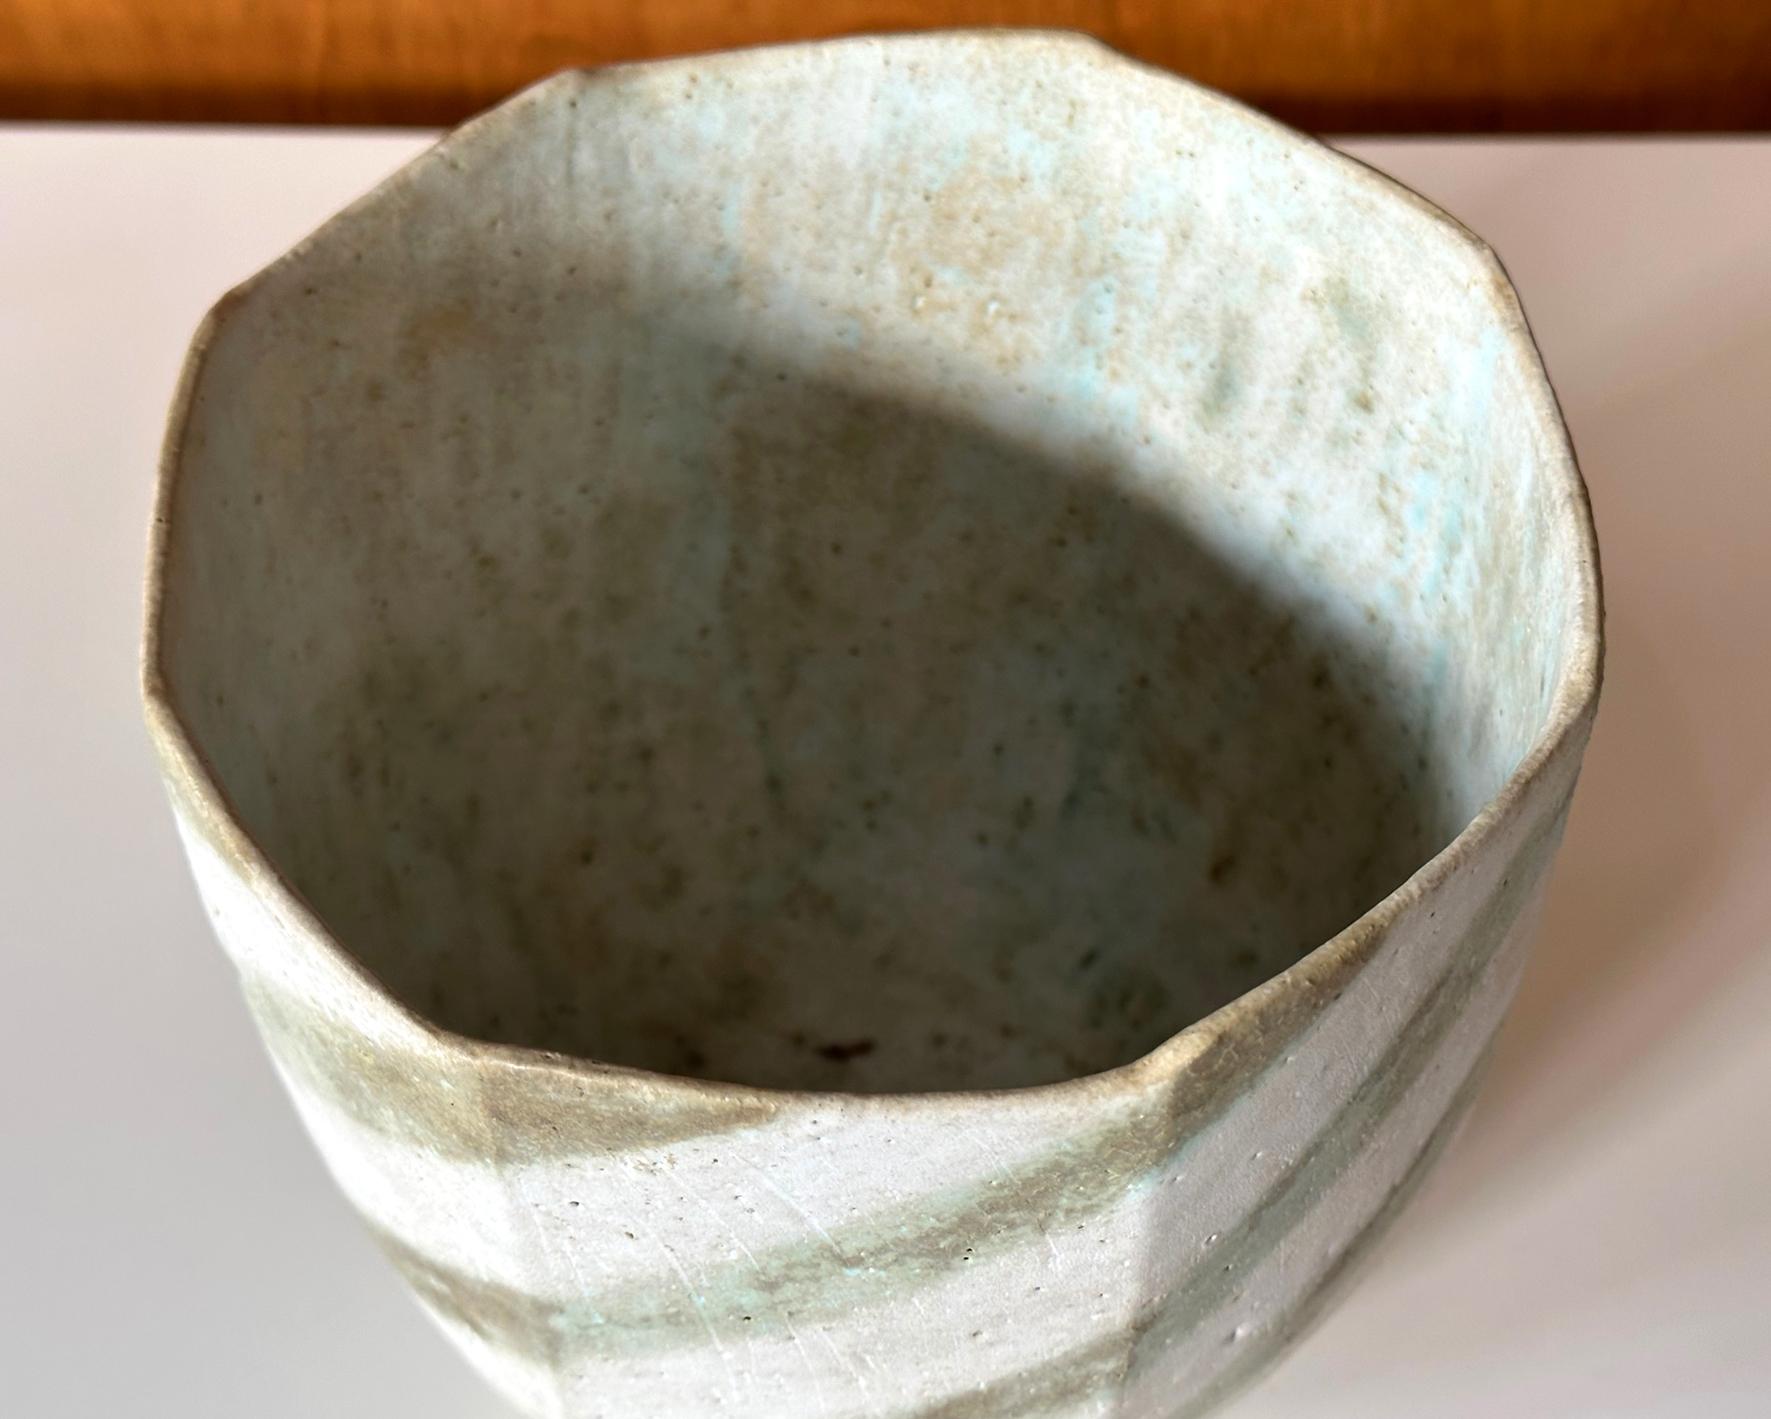 Ceramic Faceted Vessel with Striped Glaze by John Ward In Good Condition For Sale In Atlanta, GA